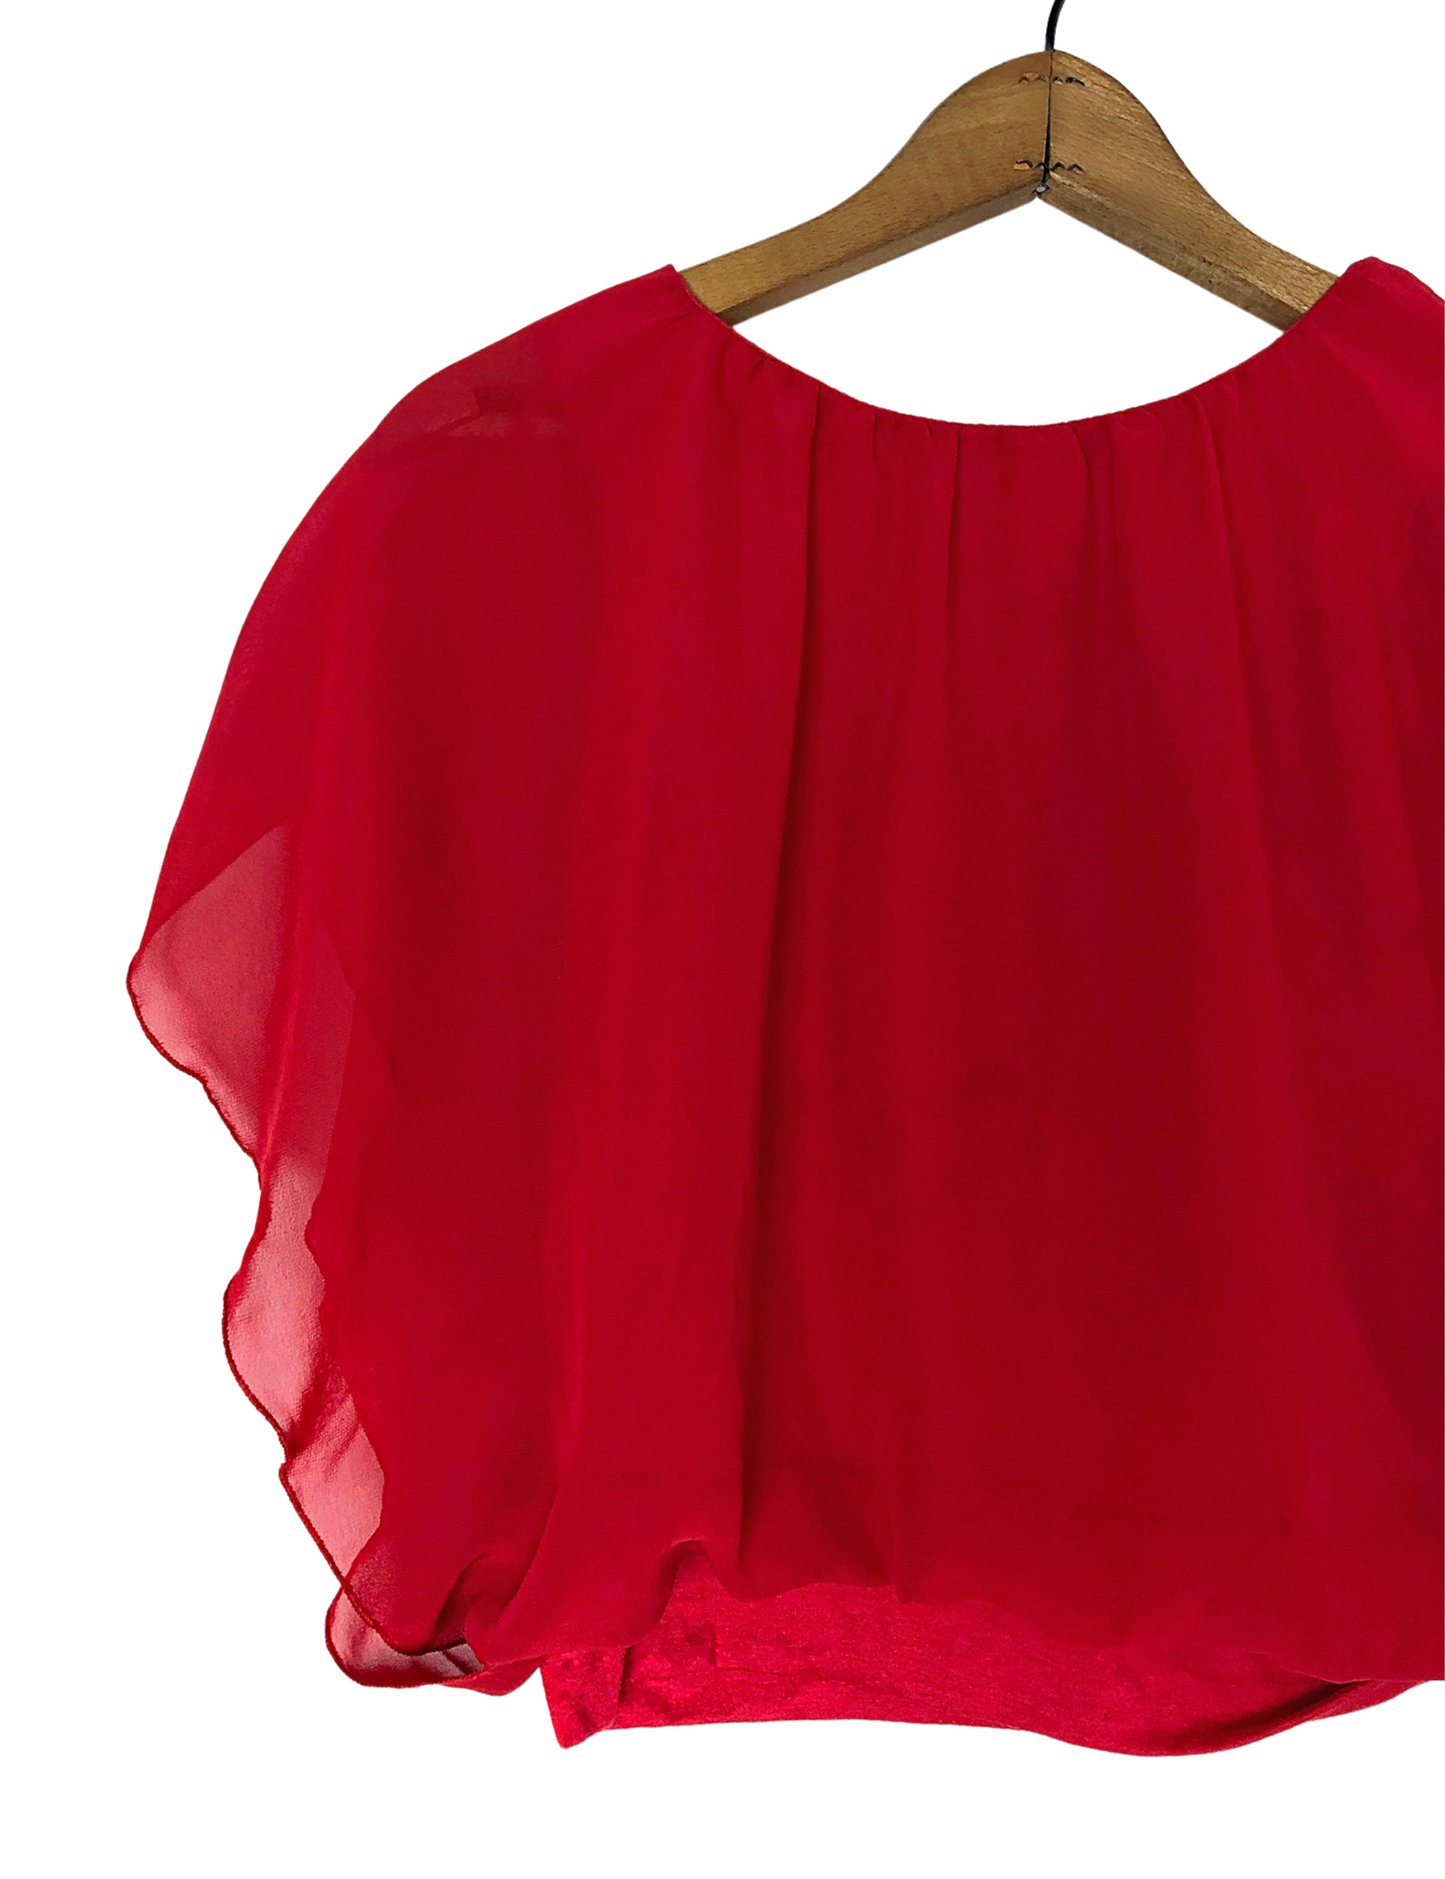 80’s Cherry Red Sheer Chiffon Butterfly Top Size Small